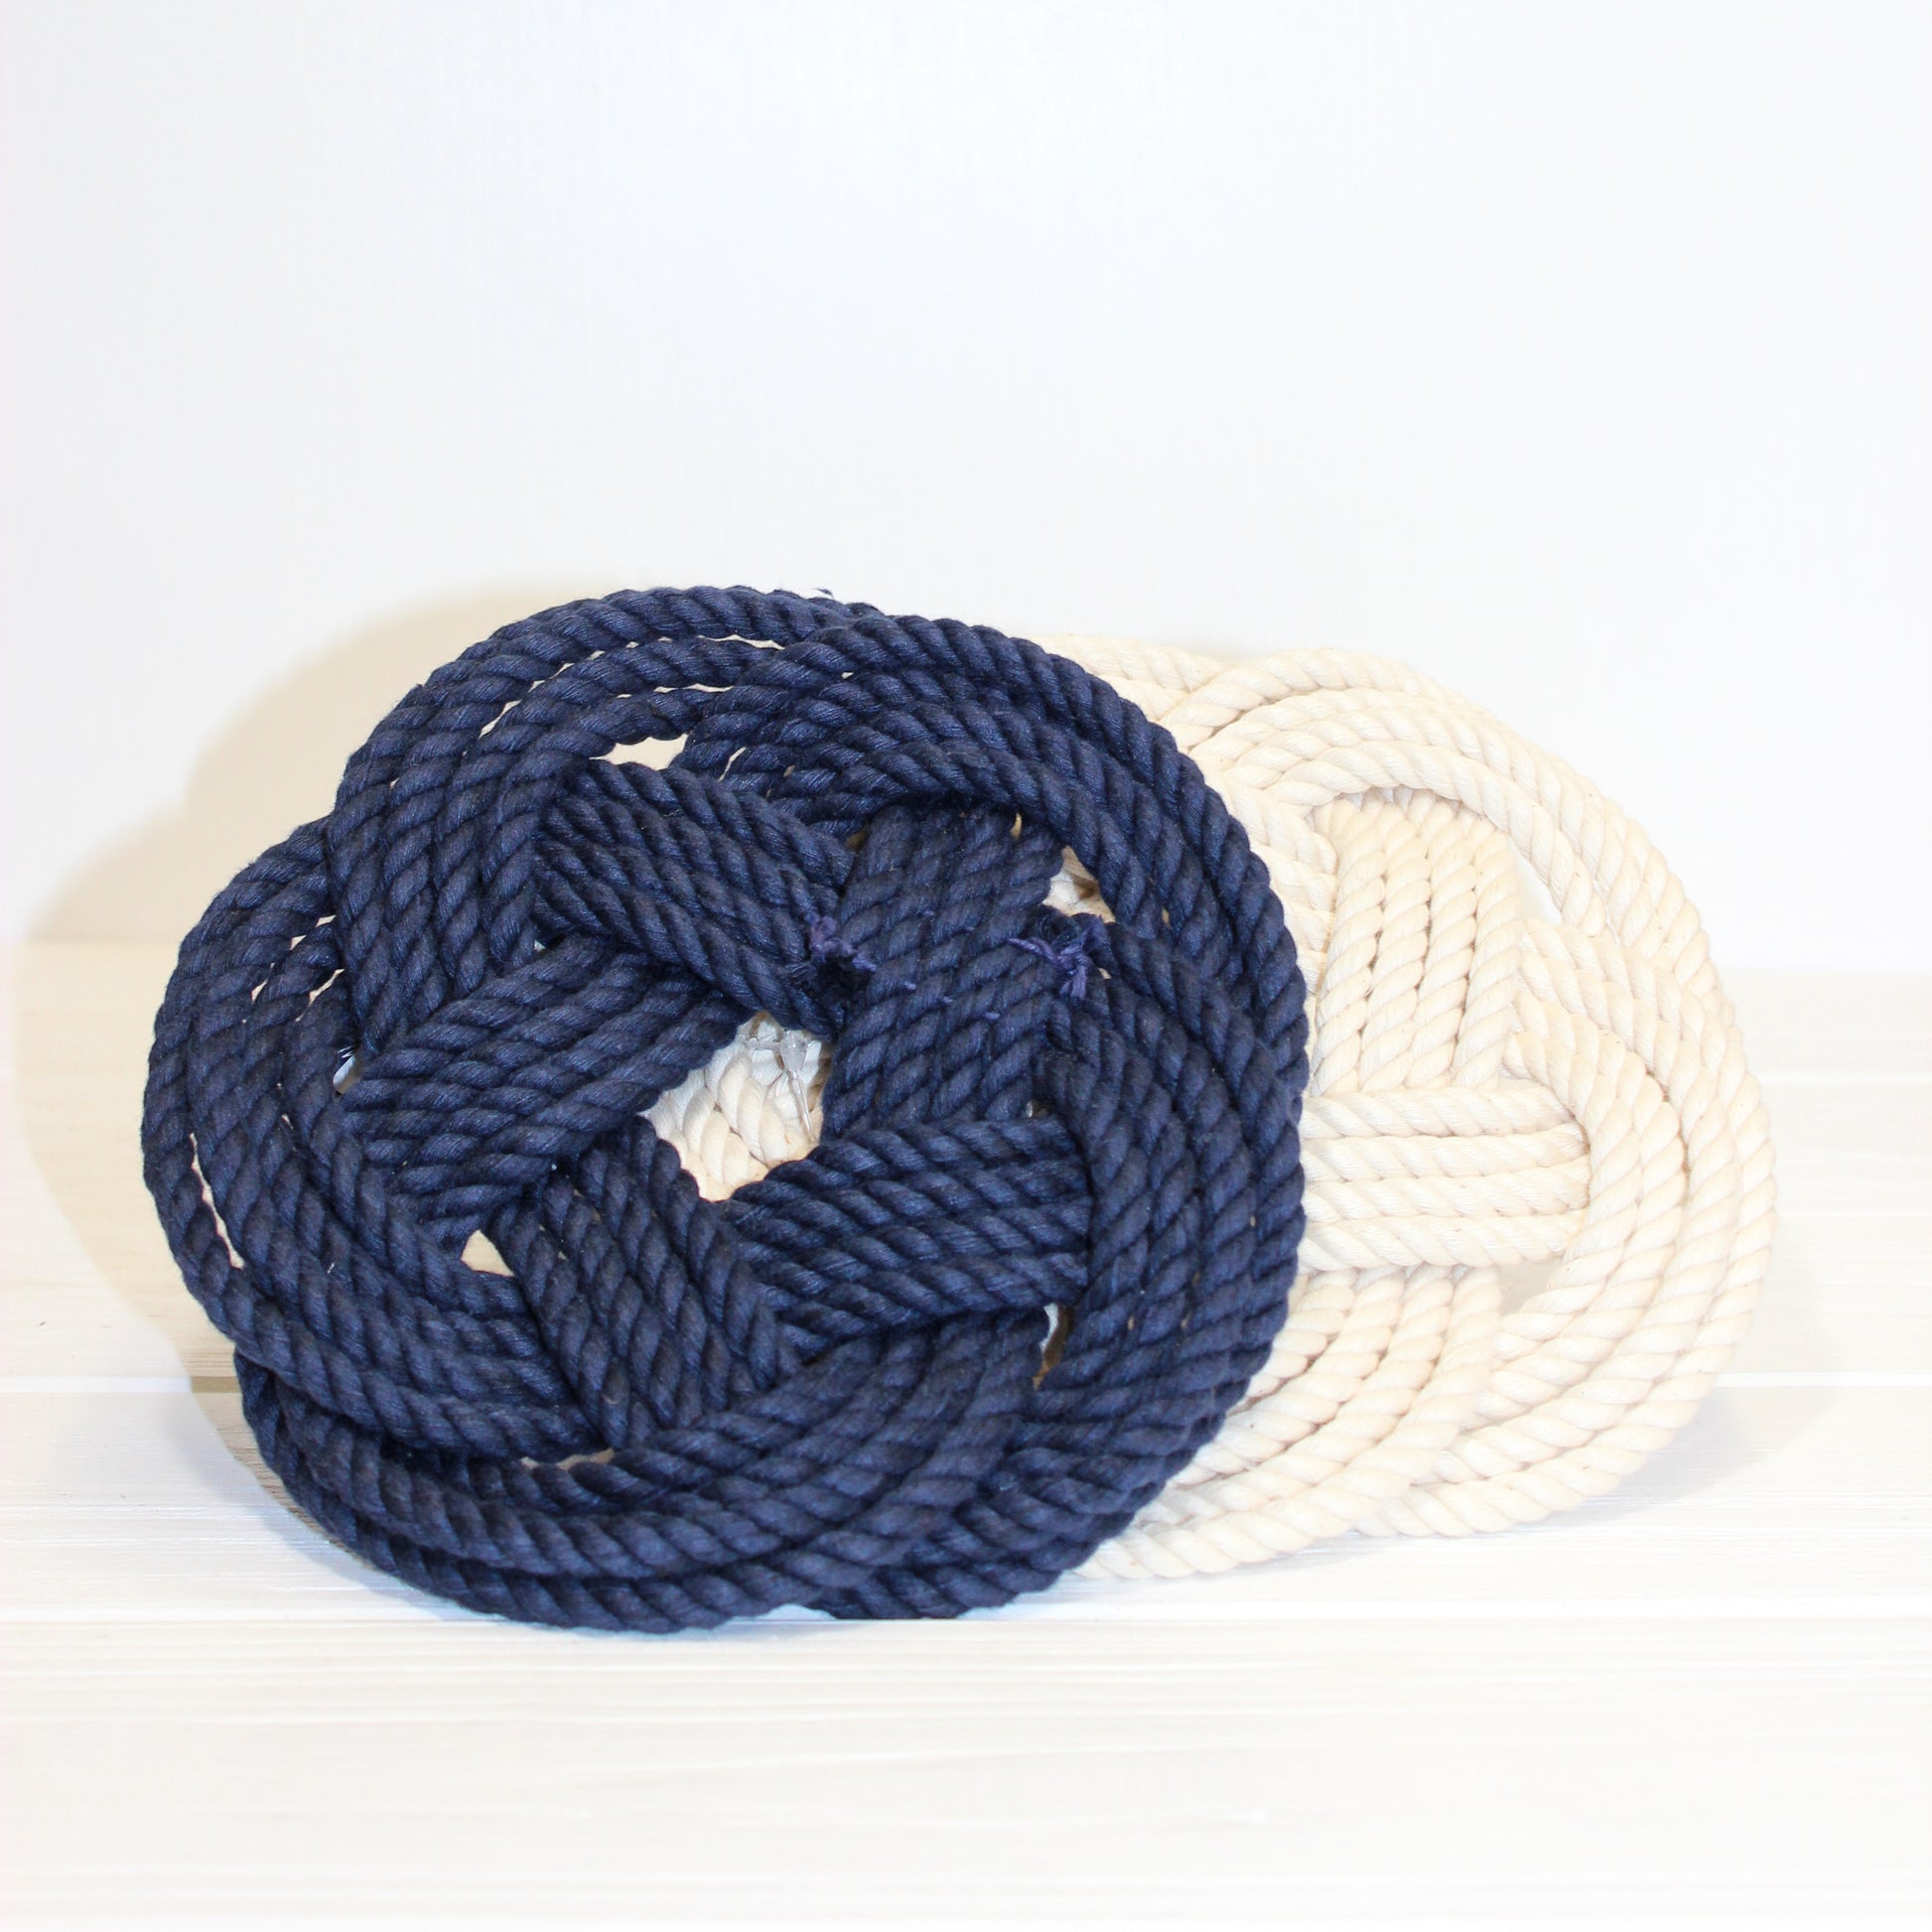 Sailor knot trivets blue and white